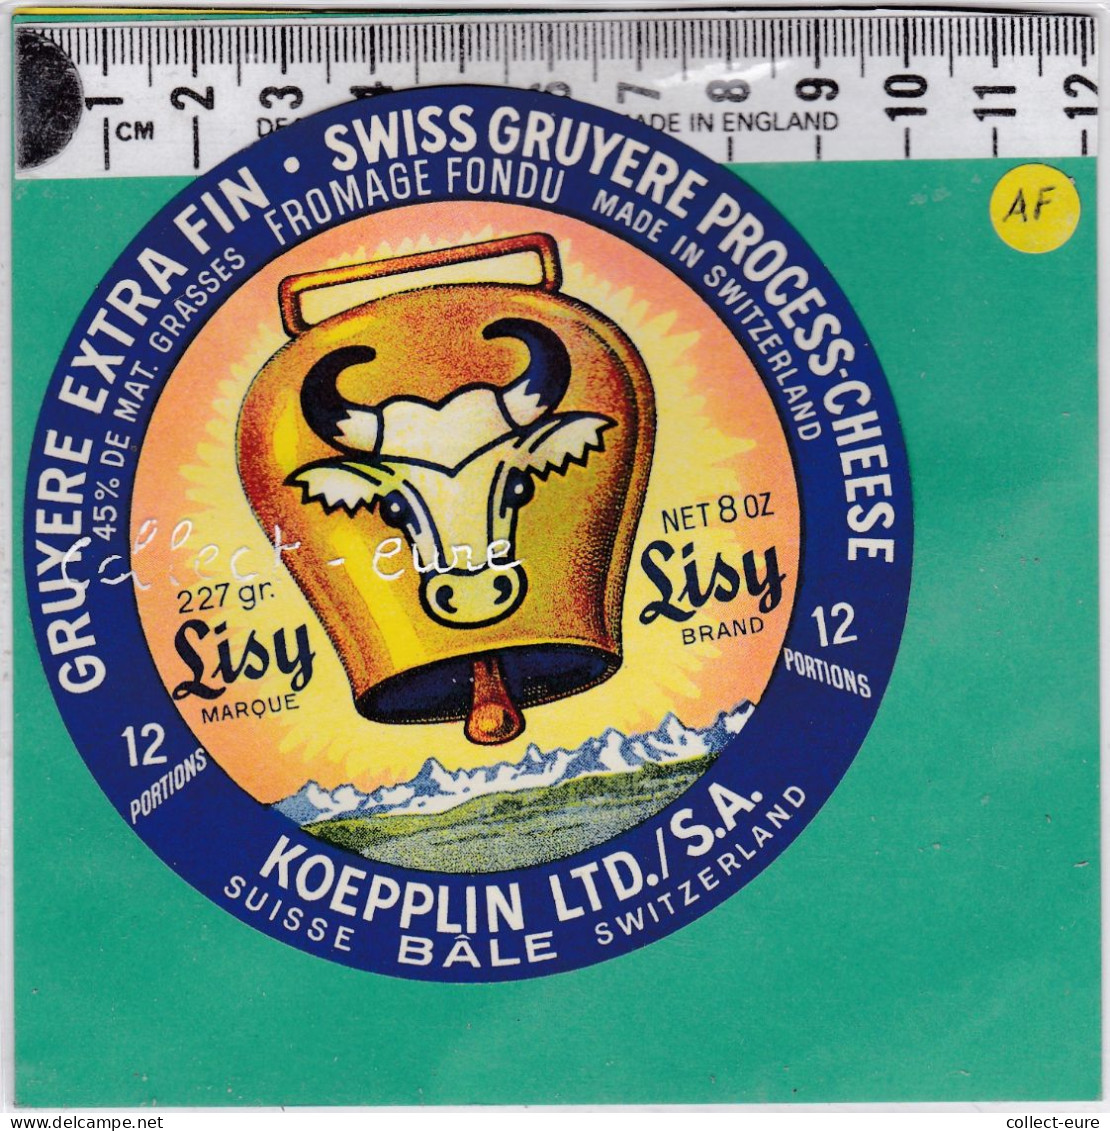 C1339 FROMAGE FONDU GRUYERE  LISY SUISSE BALE  12 PORTIONS CLOCHE - Cheese